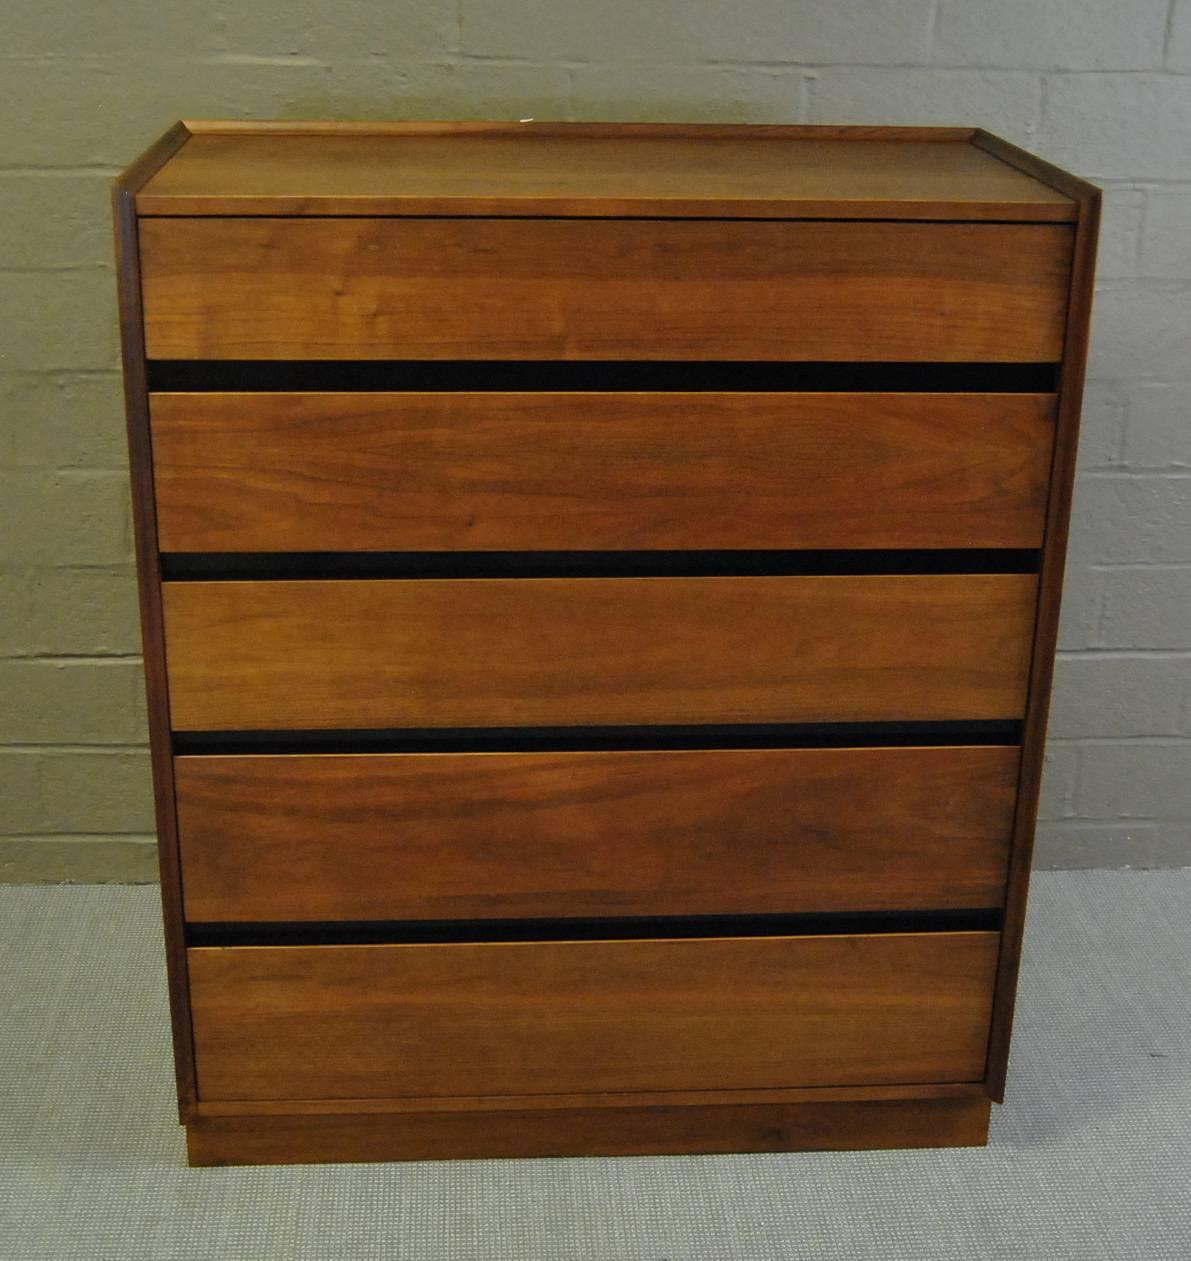 Great Mid-Century Modern five-drawer walnut chest by Dillingham. The chest feature walnut wood grained drawer fronts with blackout edges. This is part of the Esprit collection which was designed by Merton L. Gershun for the Dillingham Esprit